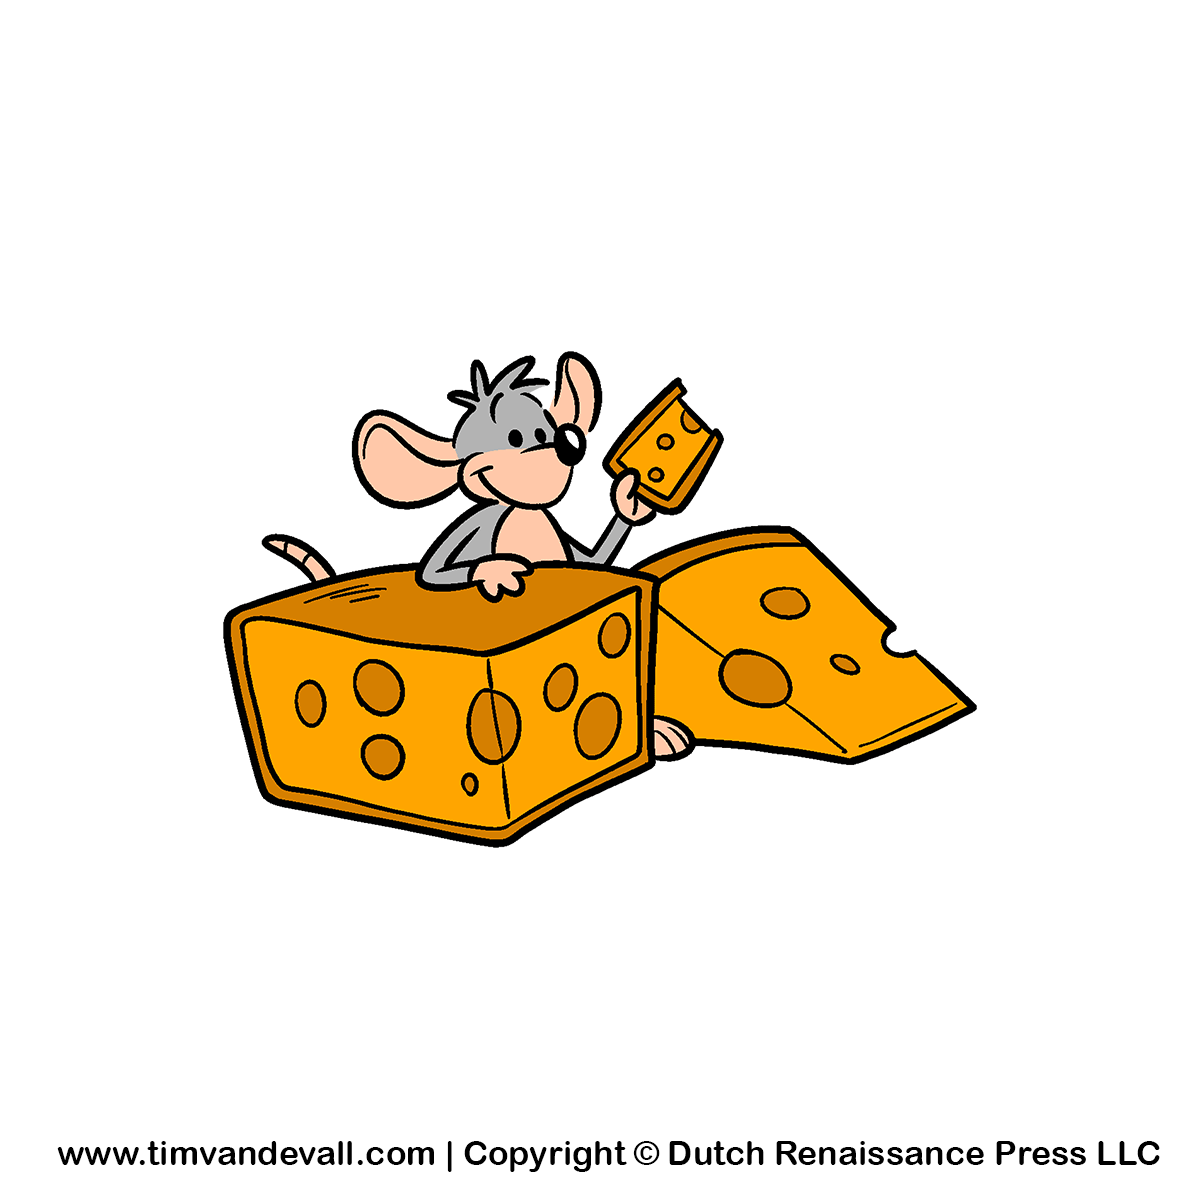 cheese clipart cheddar